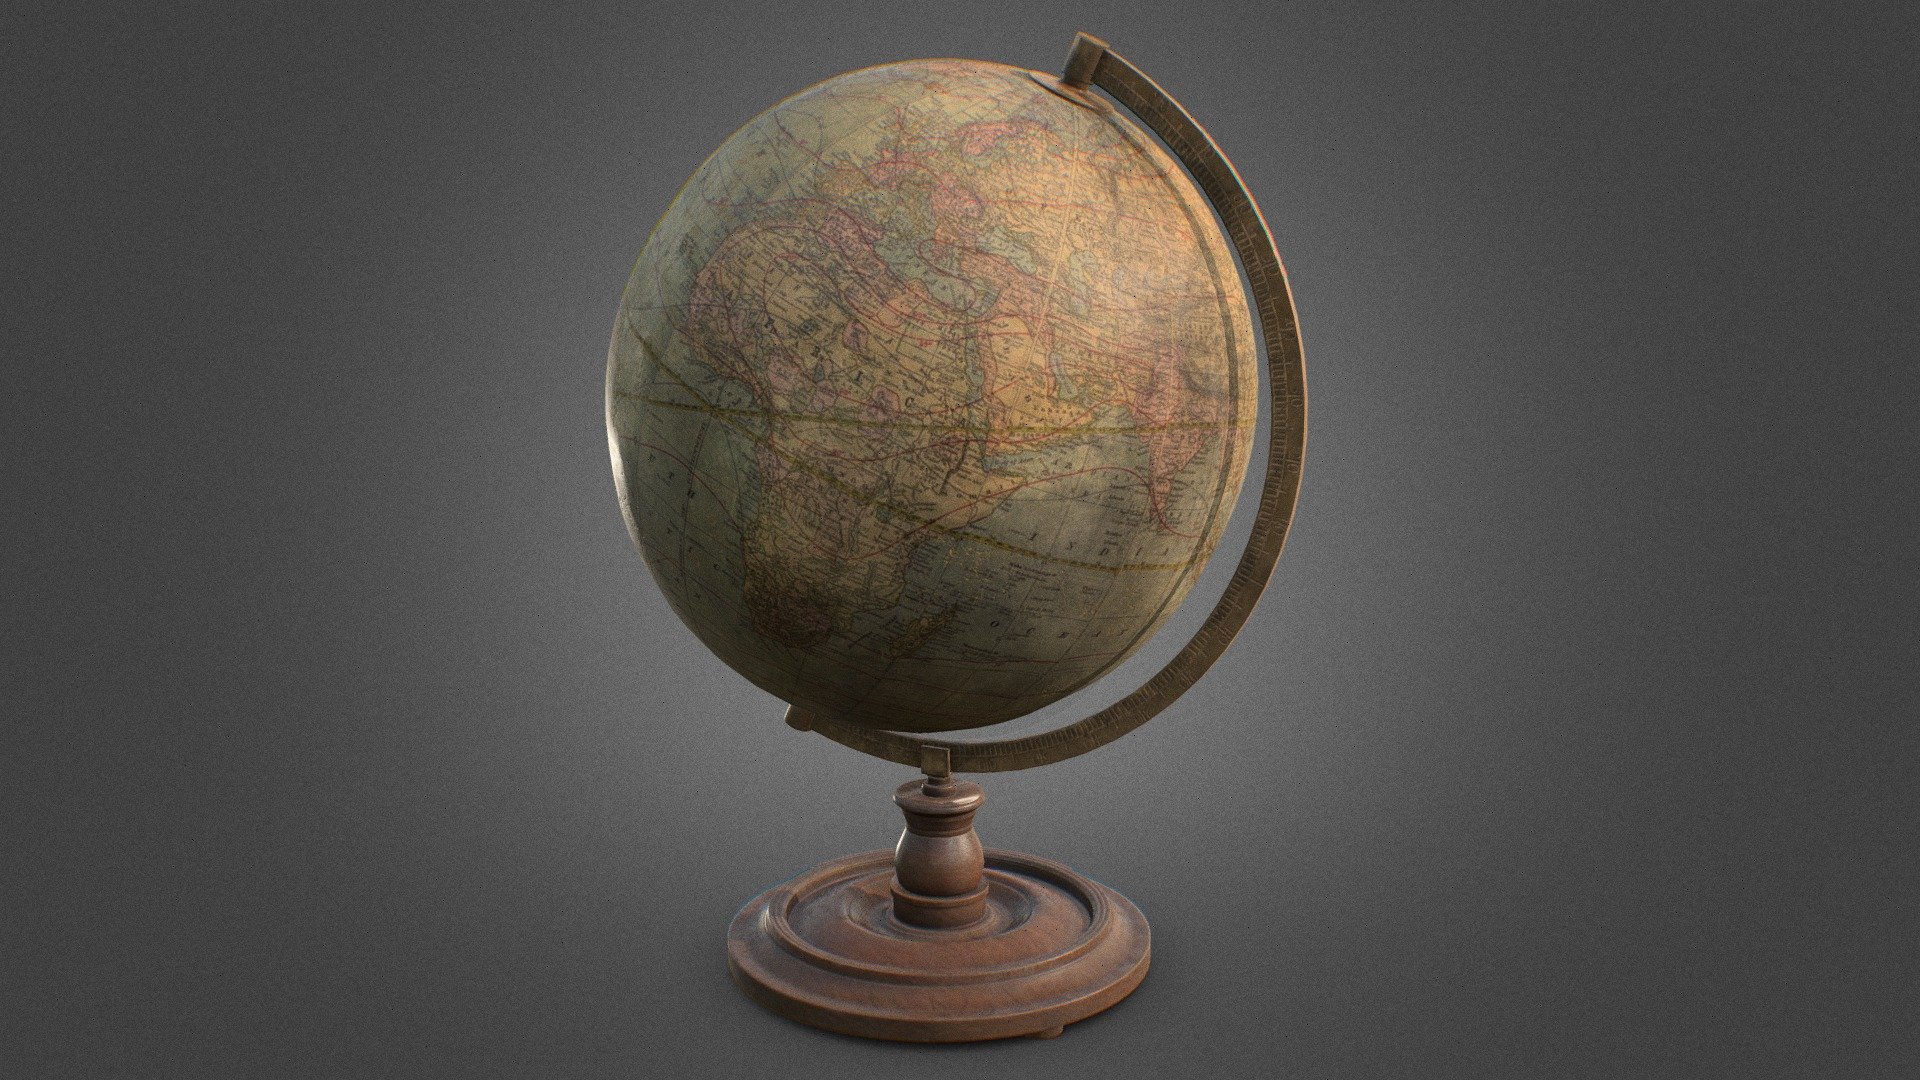 A game-ready antique globe. Modelled in Blender and textured in Substance Painter.

Free to download 3d model